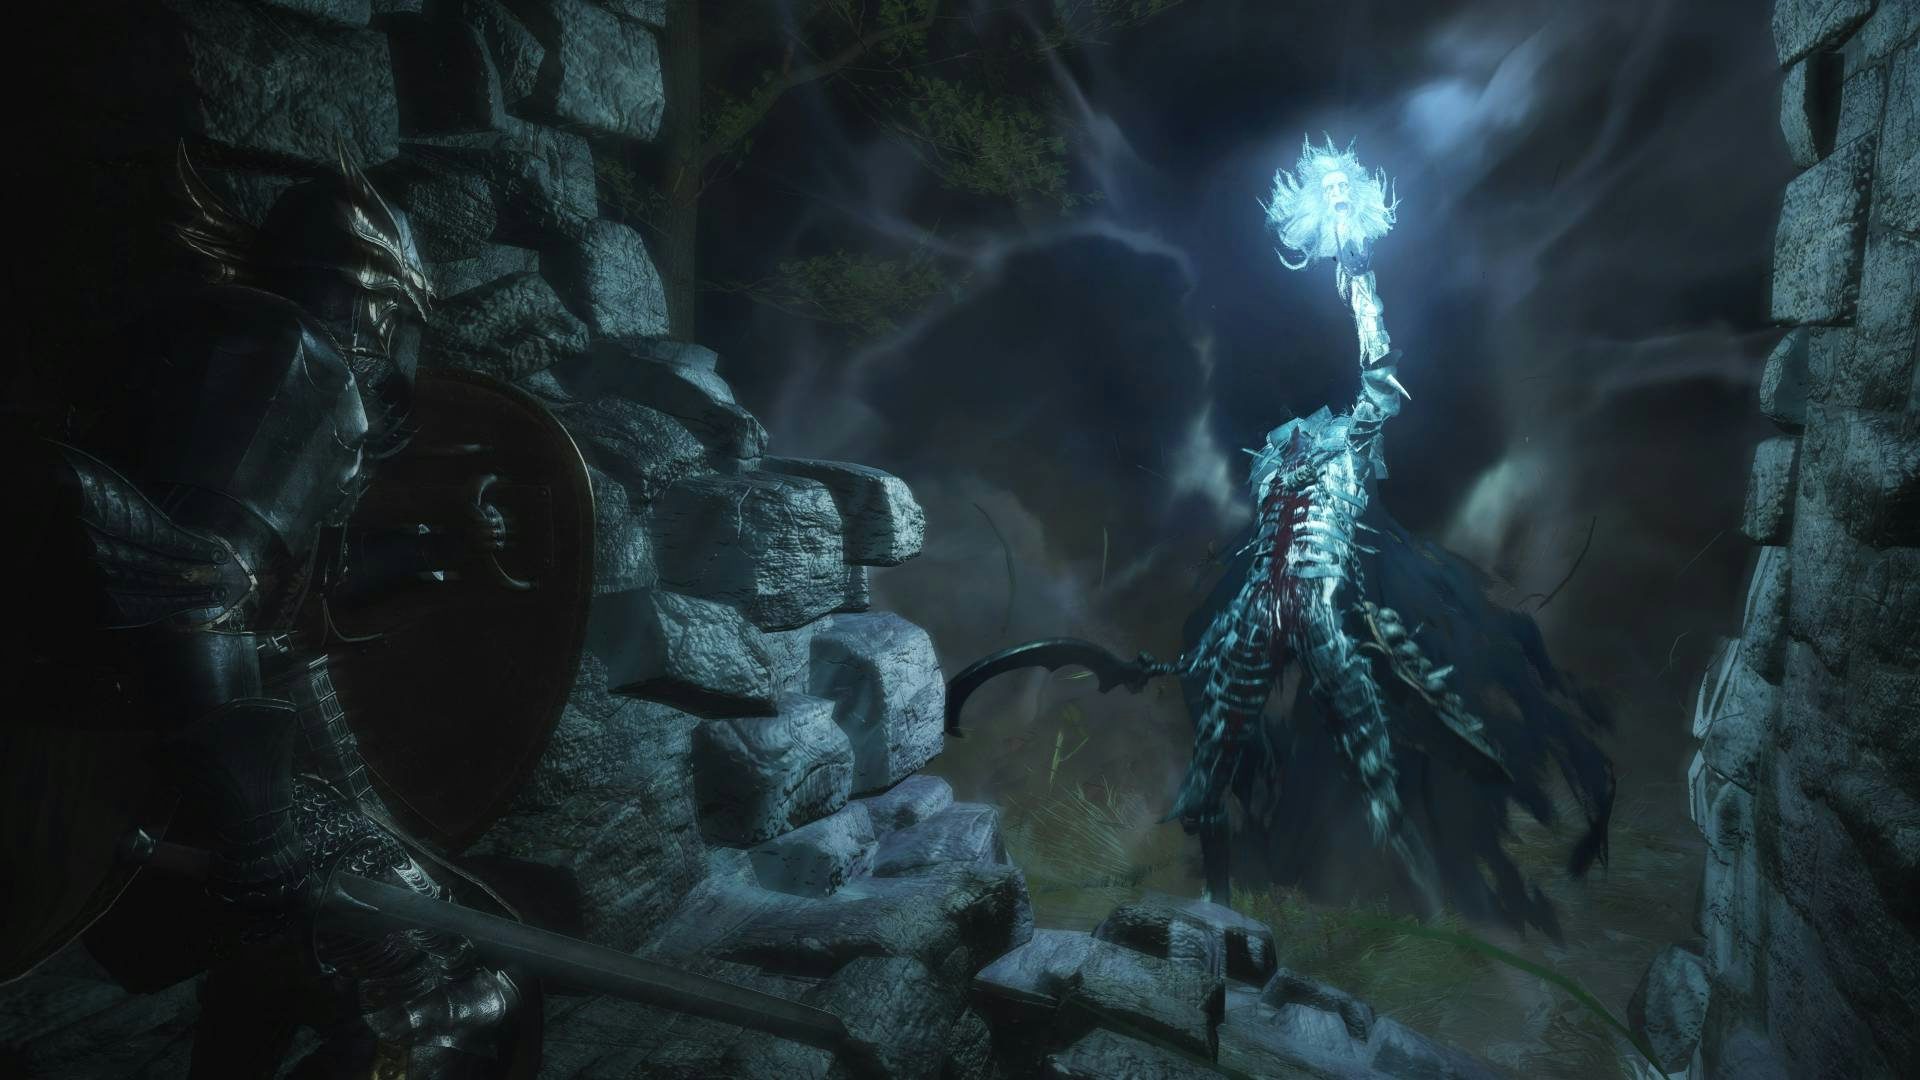 Take the spookiest screenshot you can in Dragon's Dogma 2 for $3!